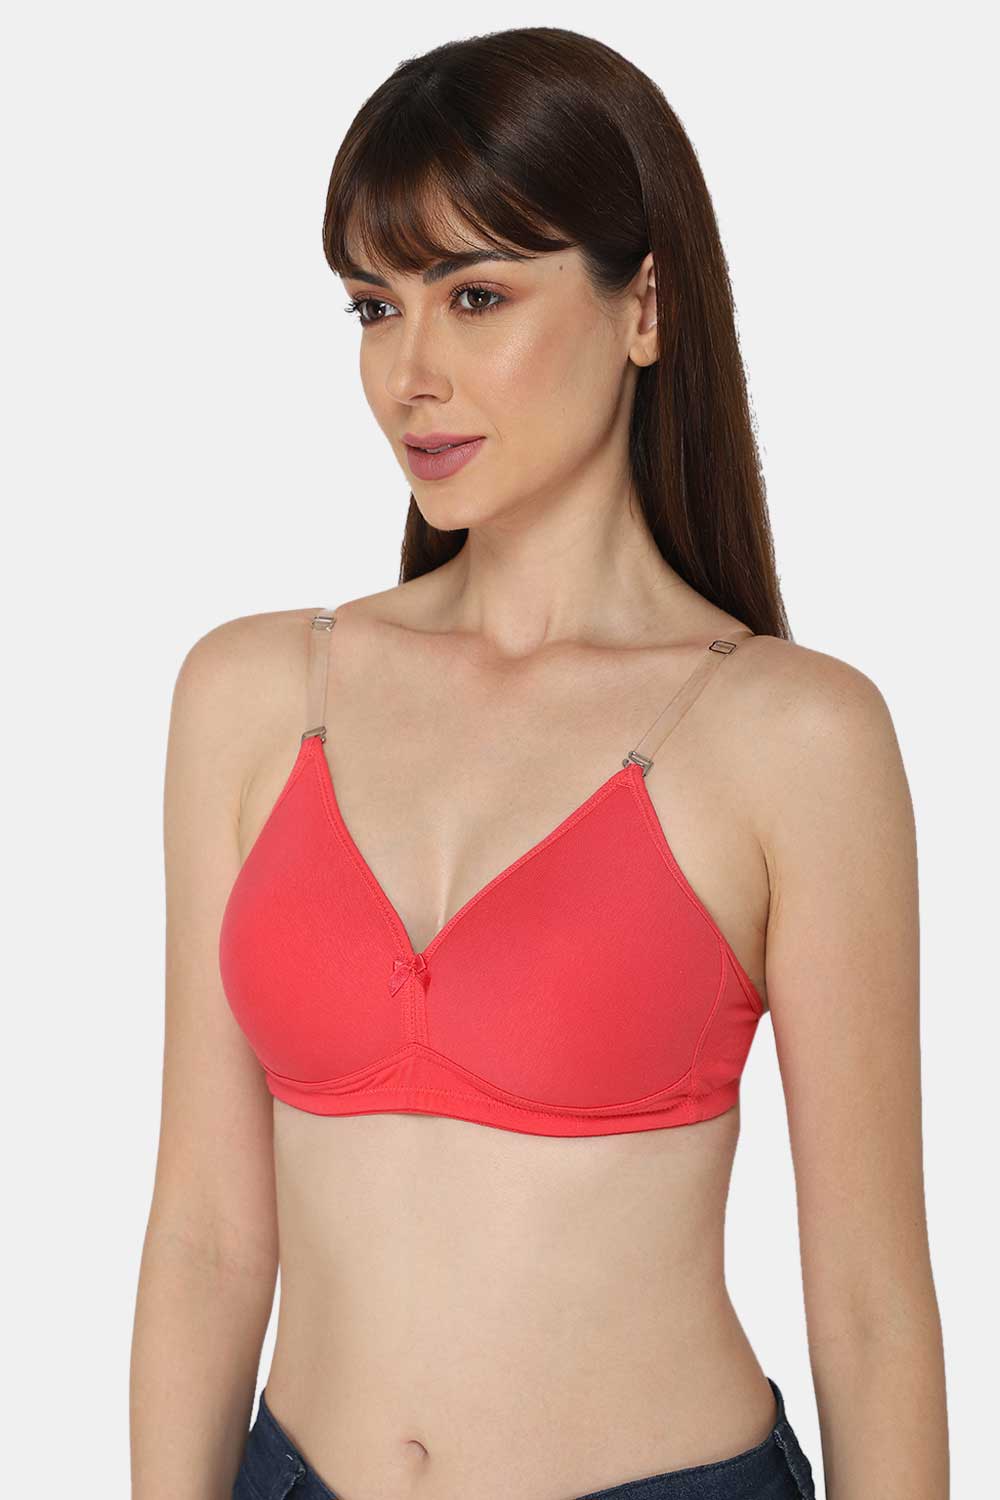 Buy online Wine Cotton Bra With Transparent Straps from lingerie